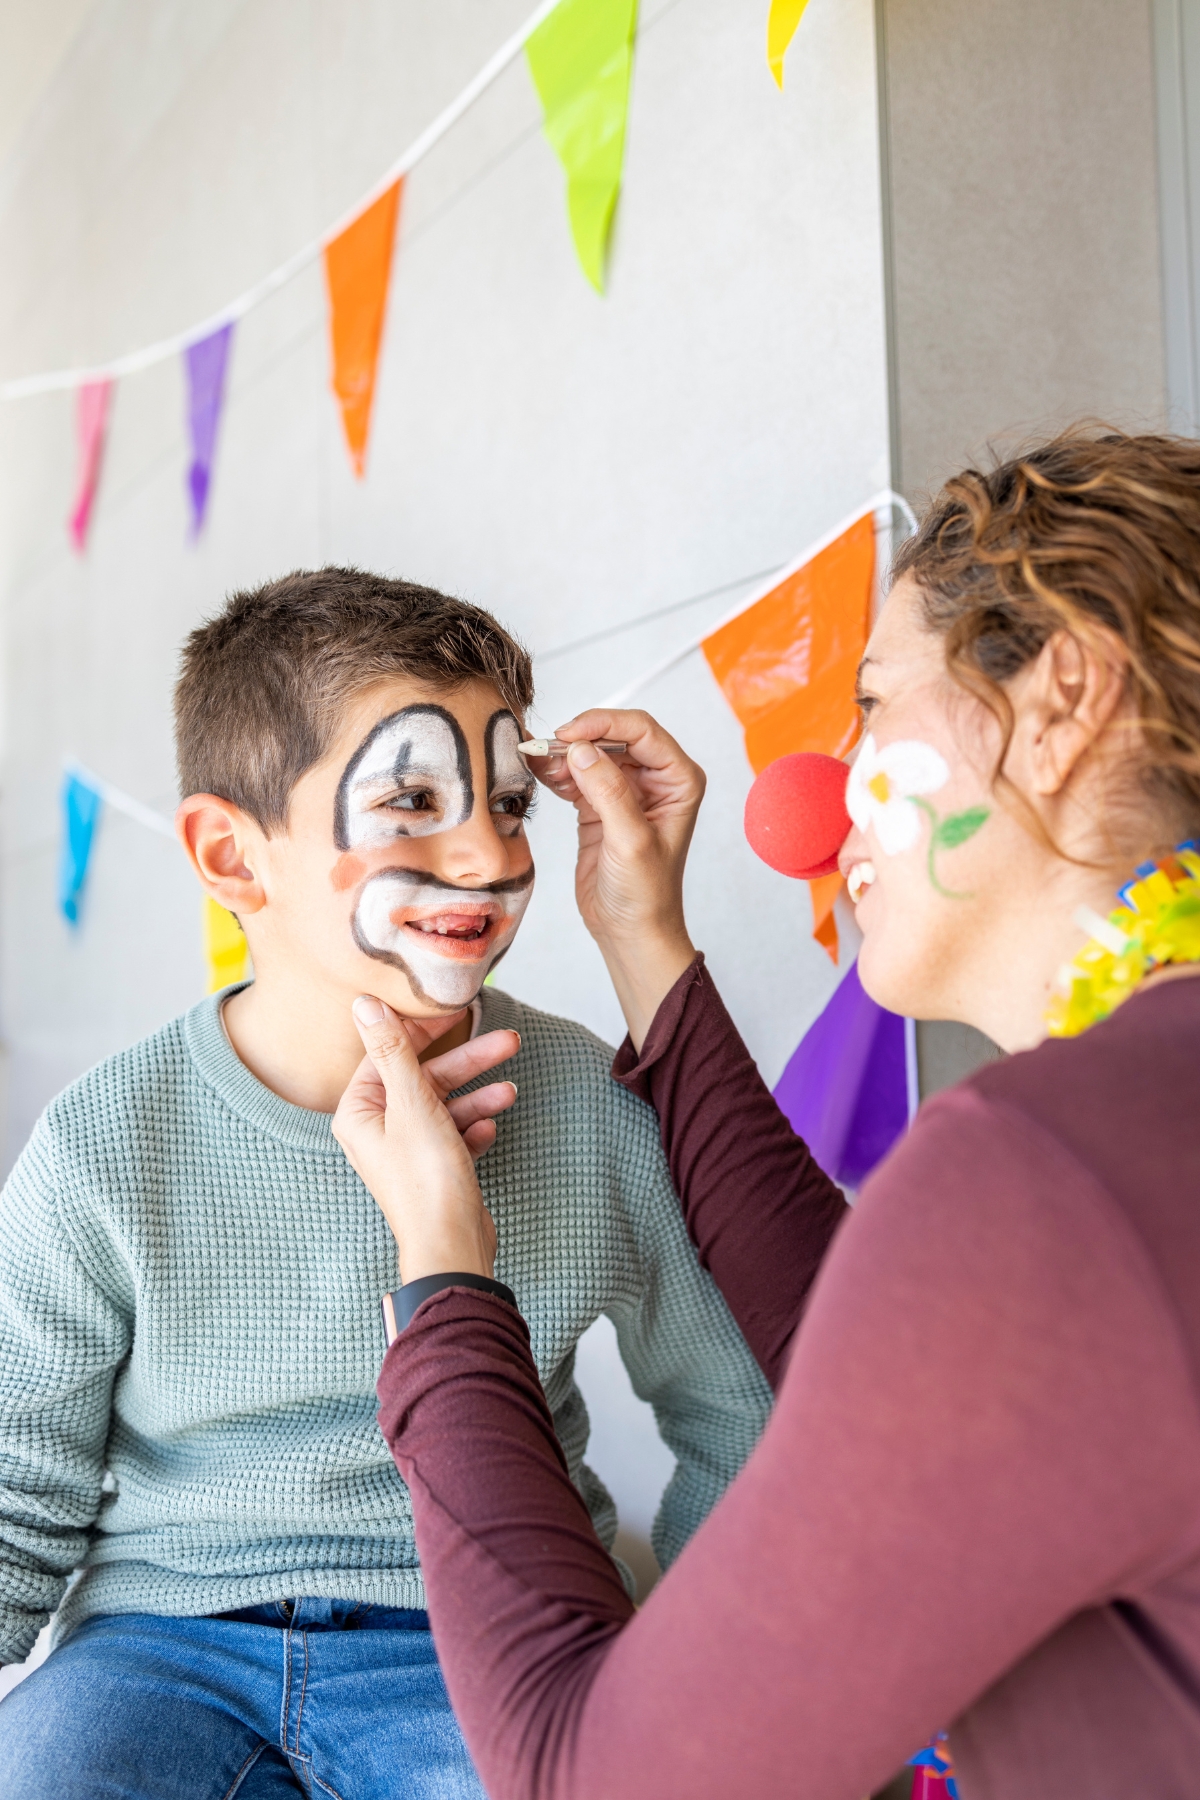 Entertainment Ideas for a Kid's Birthday Party